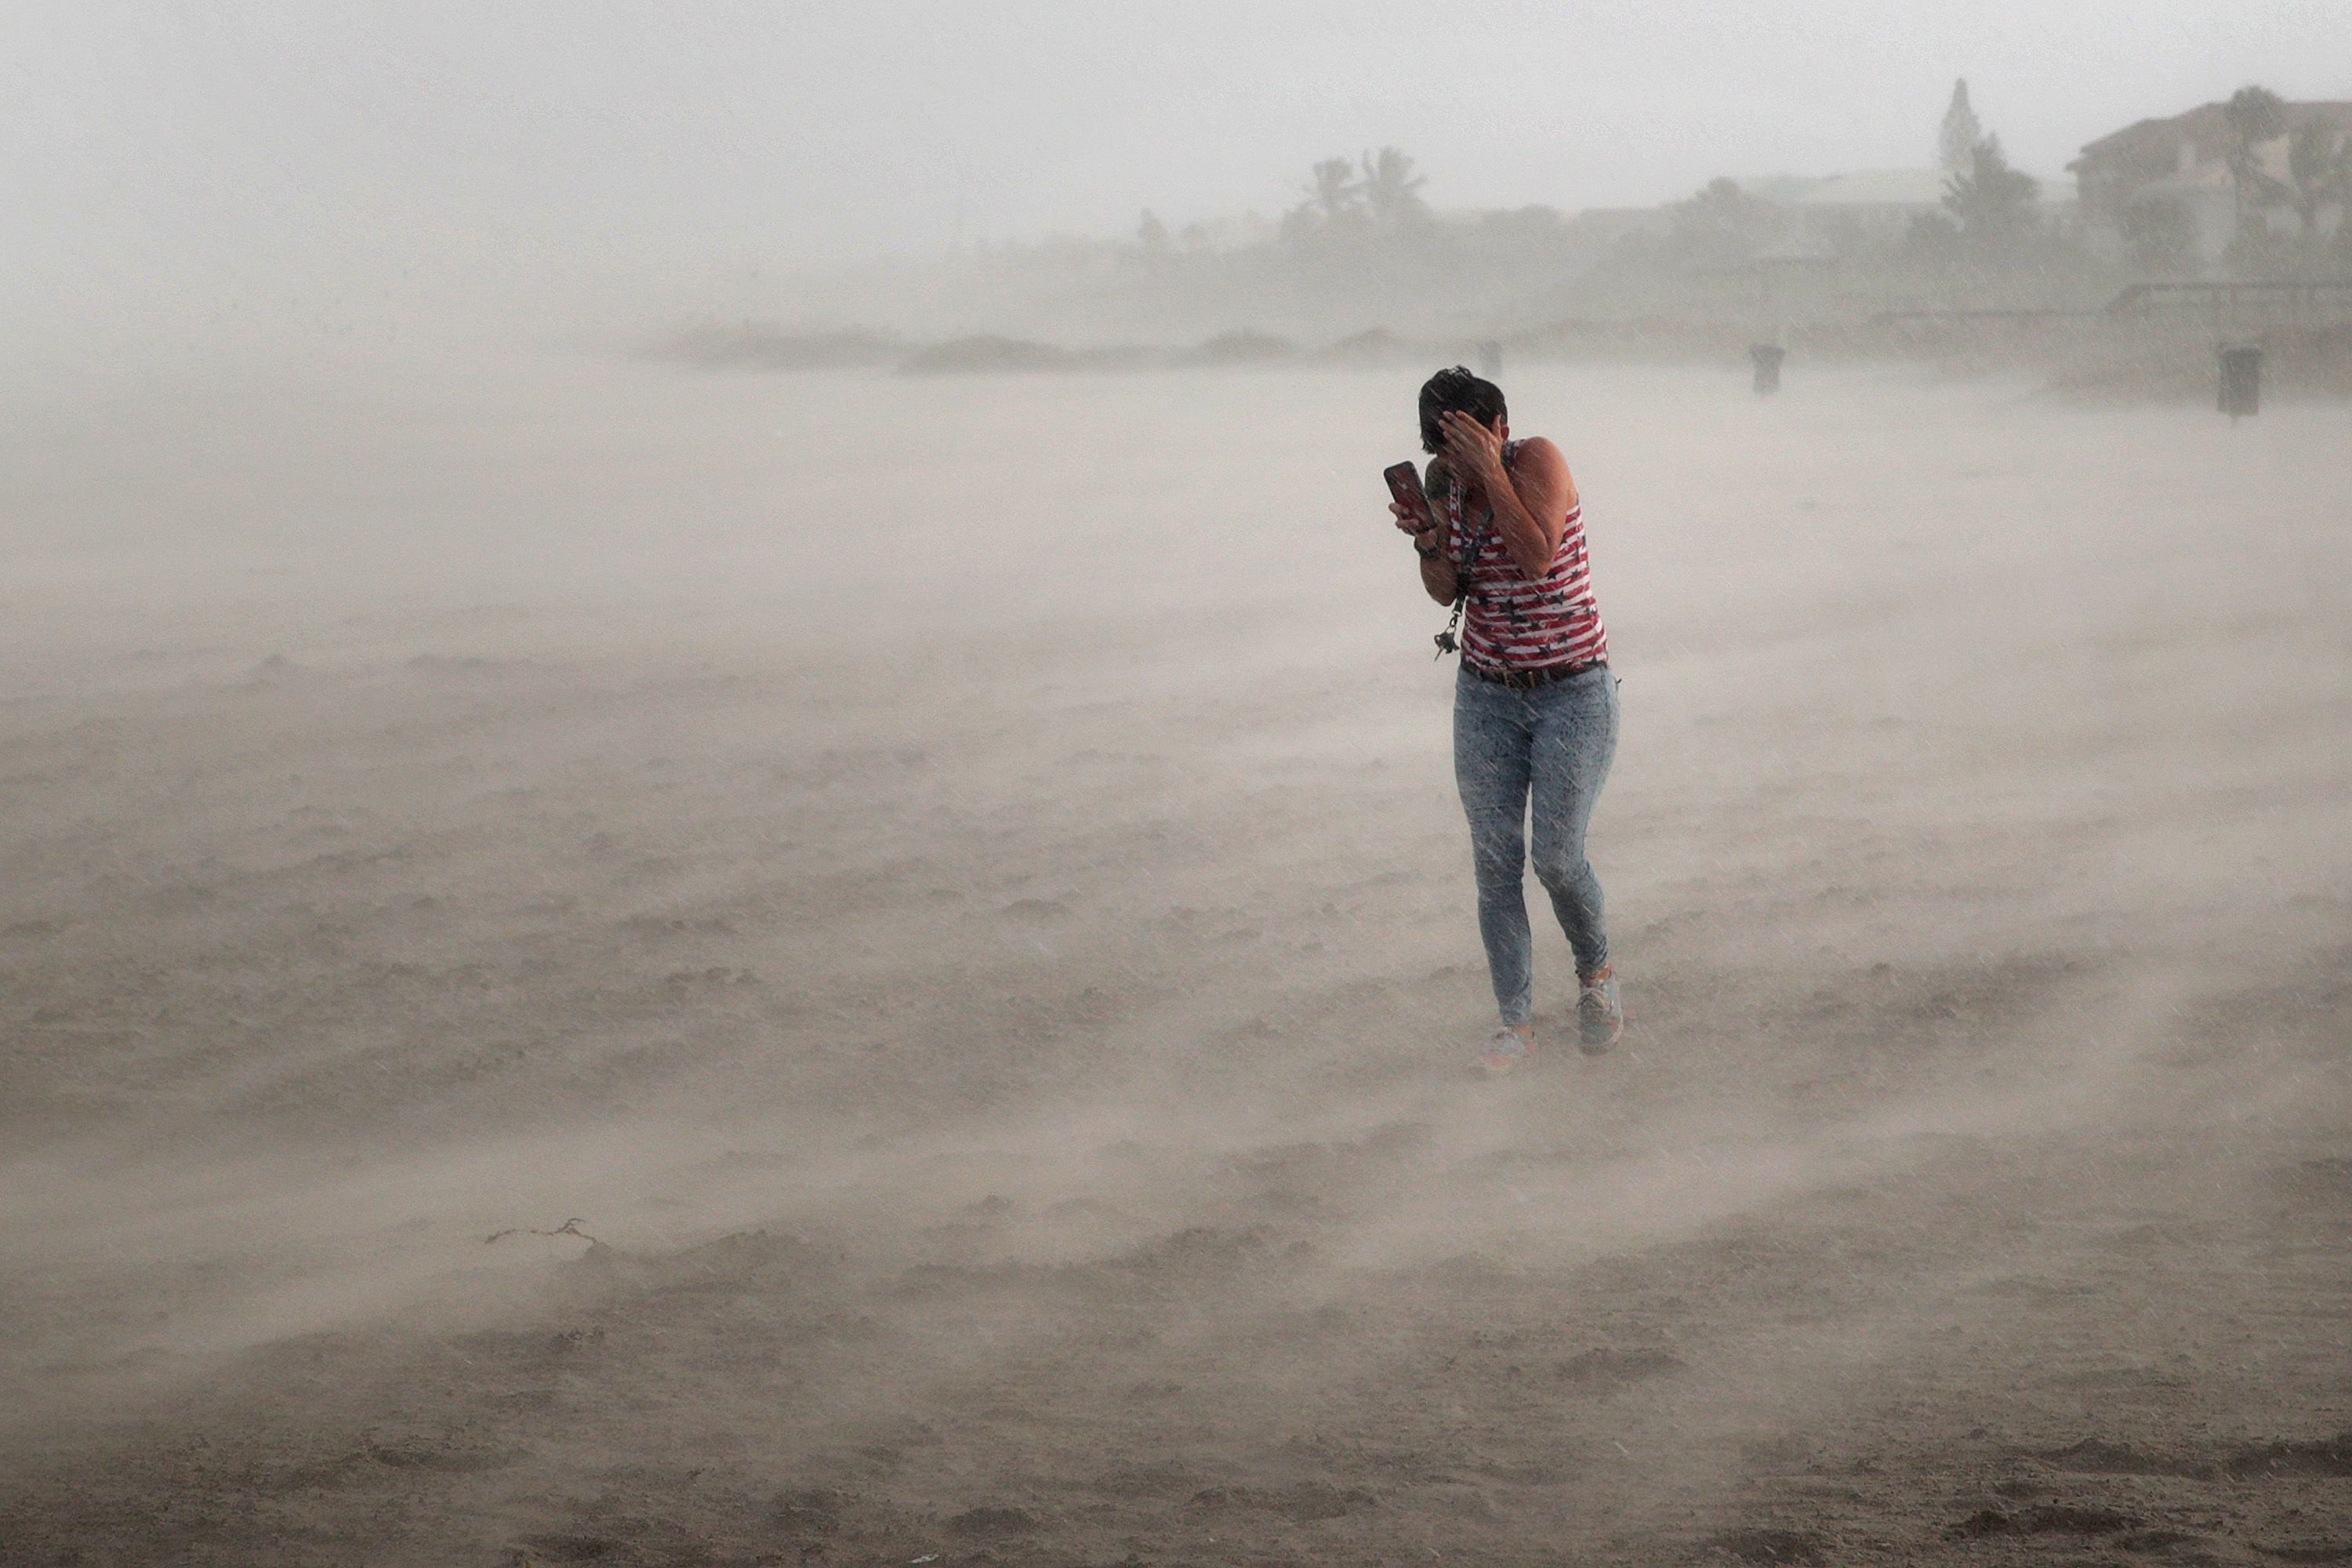 A woman seeks cover from wind, blowing sand and rain whipped up by Hurricane Dorian as she walks on the beach on September 2